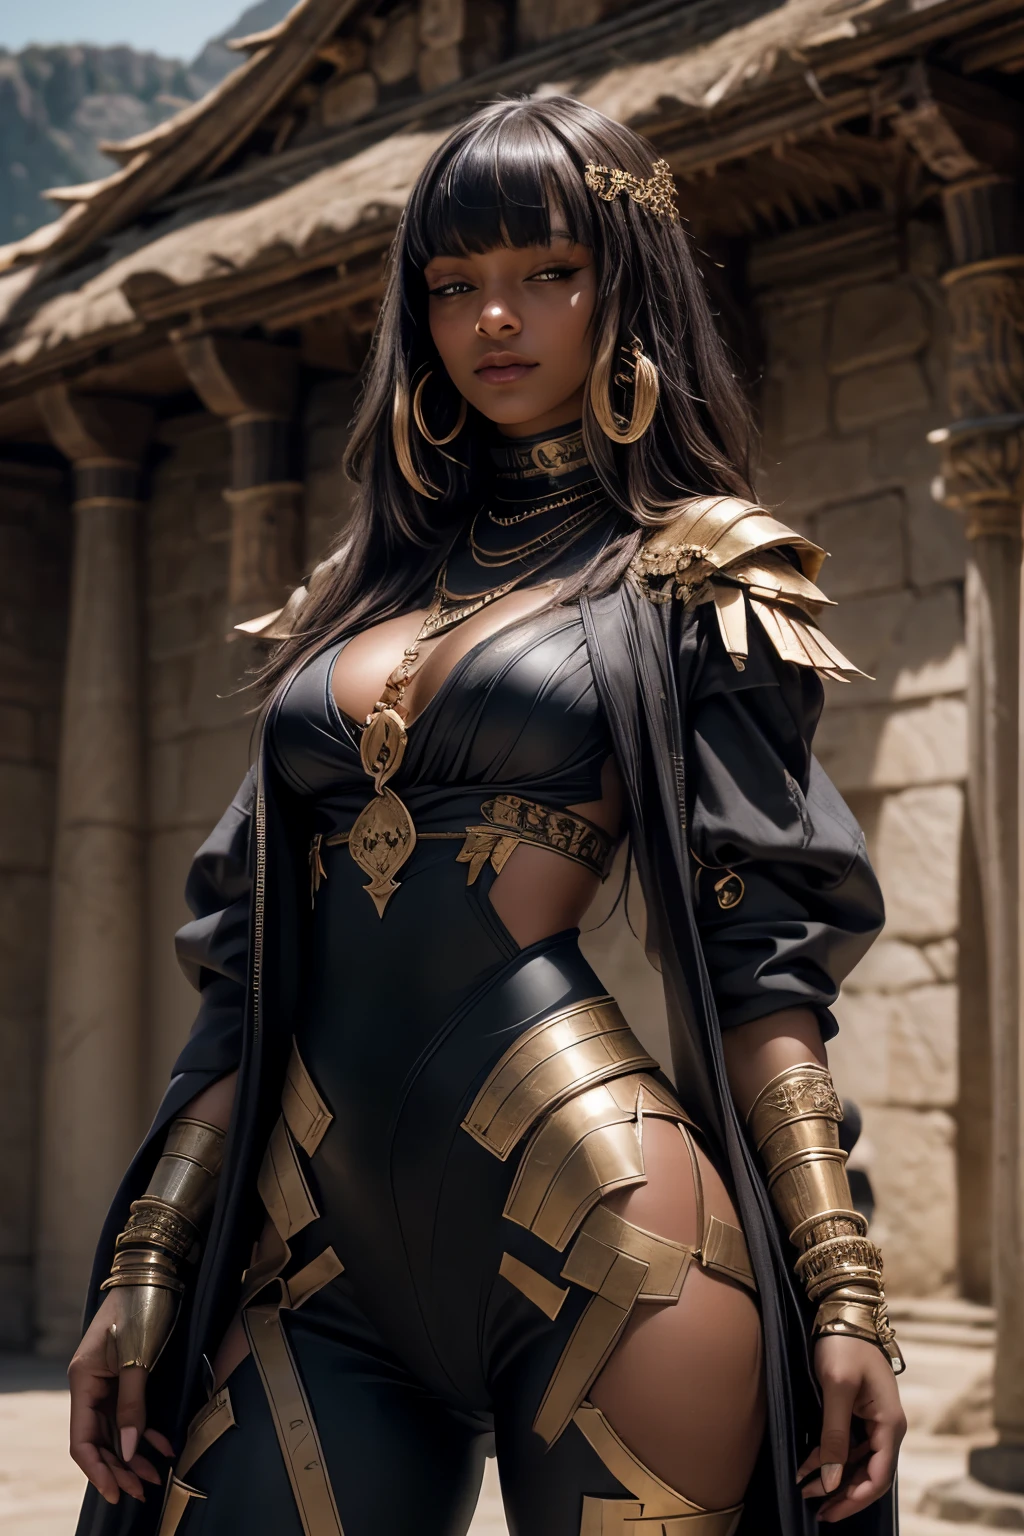 A stunning woman, clad in a skimpy warrior outfit, boasts a narrow waist, holding a spear in one hand, standing proudly before a highly detailed castle backdrop. The dynamic lighting casts sharp focus on her every feature, making her smooth, dark melanin radiate. The image exudes a sense of power and allure, captured in a moment of unyielding determination. Taken with expert precision, this smooth and intricately detailed photograph promises to leave an indelible impression. (Inspired by European and American women prompts).

[European woman: 1.0], [Warrior outfit: 1.2], [Narrow waist: 1.